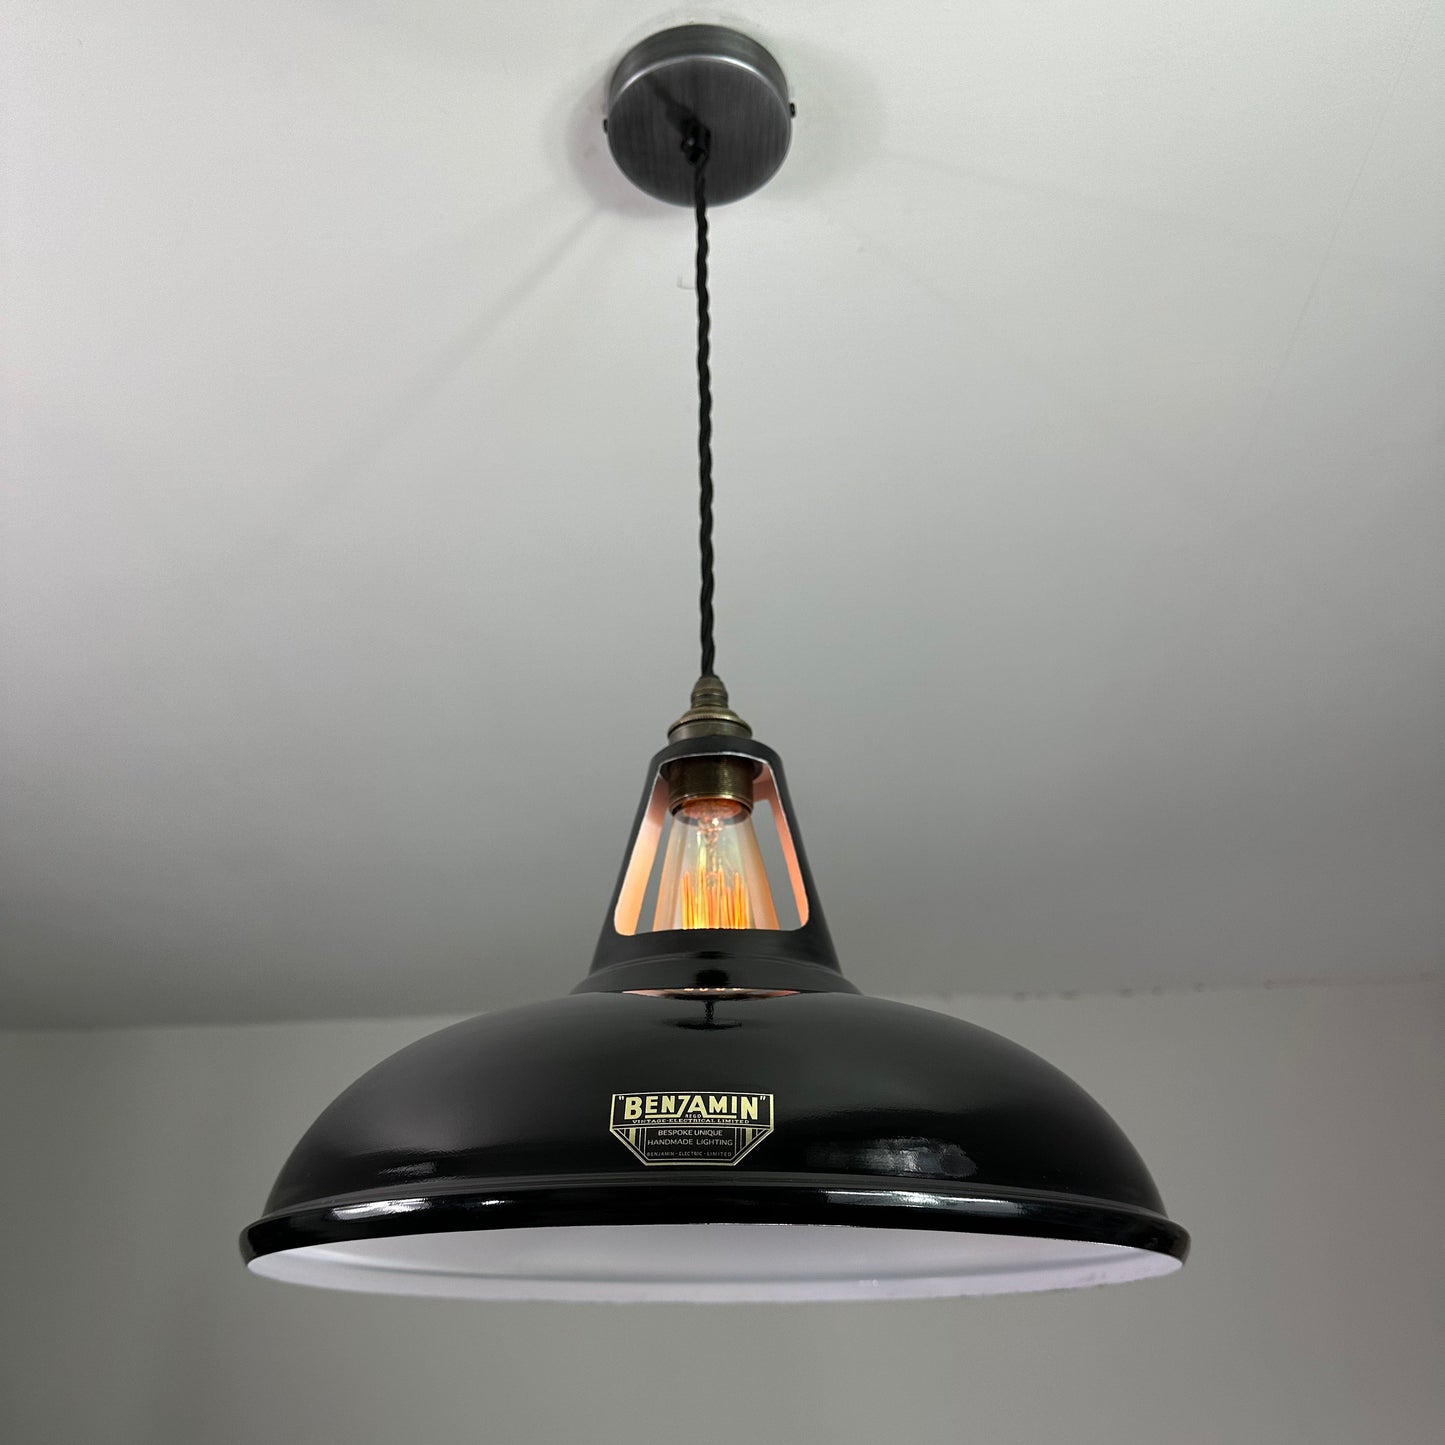 Cawston XL ~ Midnight Black Solid Shade Slotted Design Pendant Set Light | Ceiling Dining Room | Kitchen Table | Vintage Bulb 14 Inch